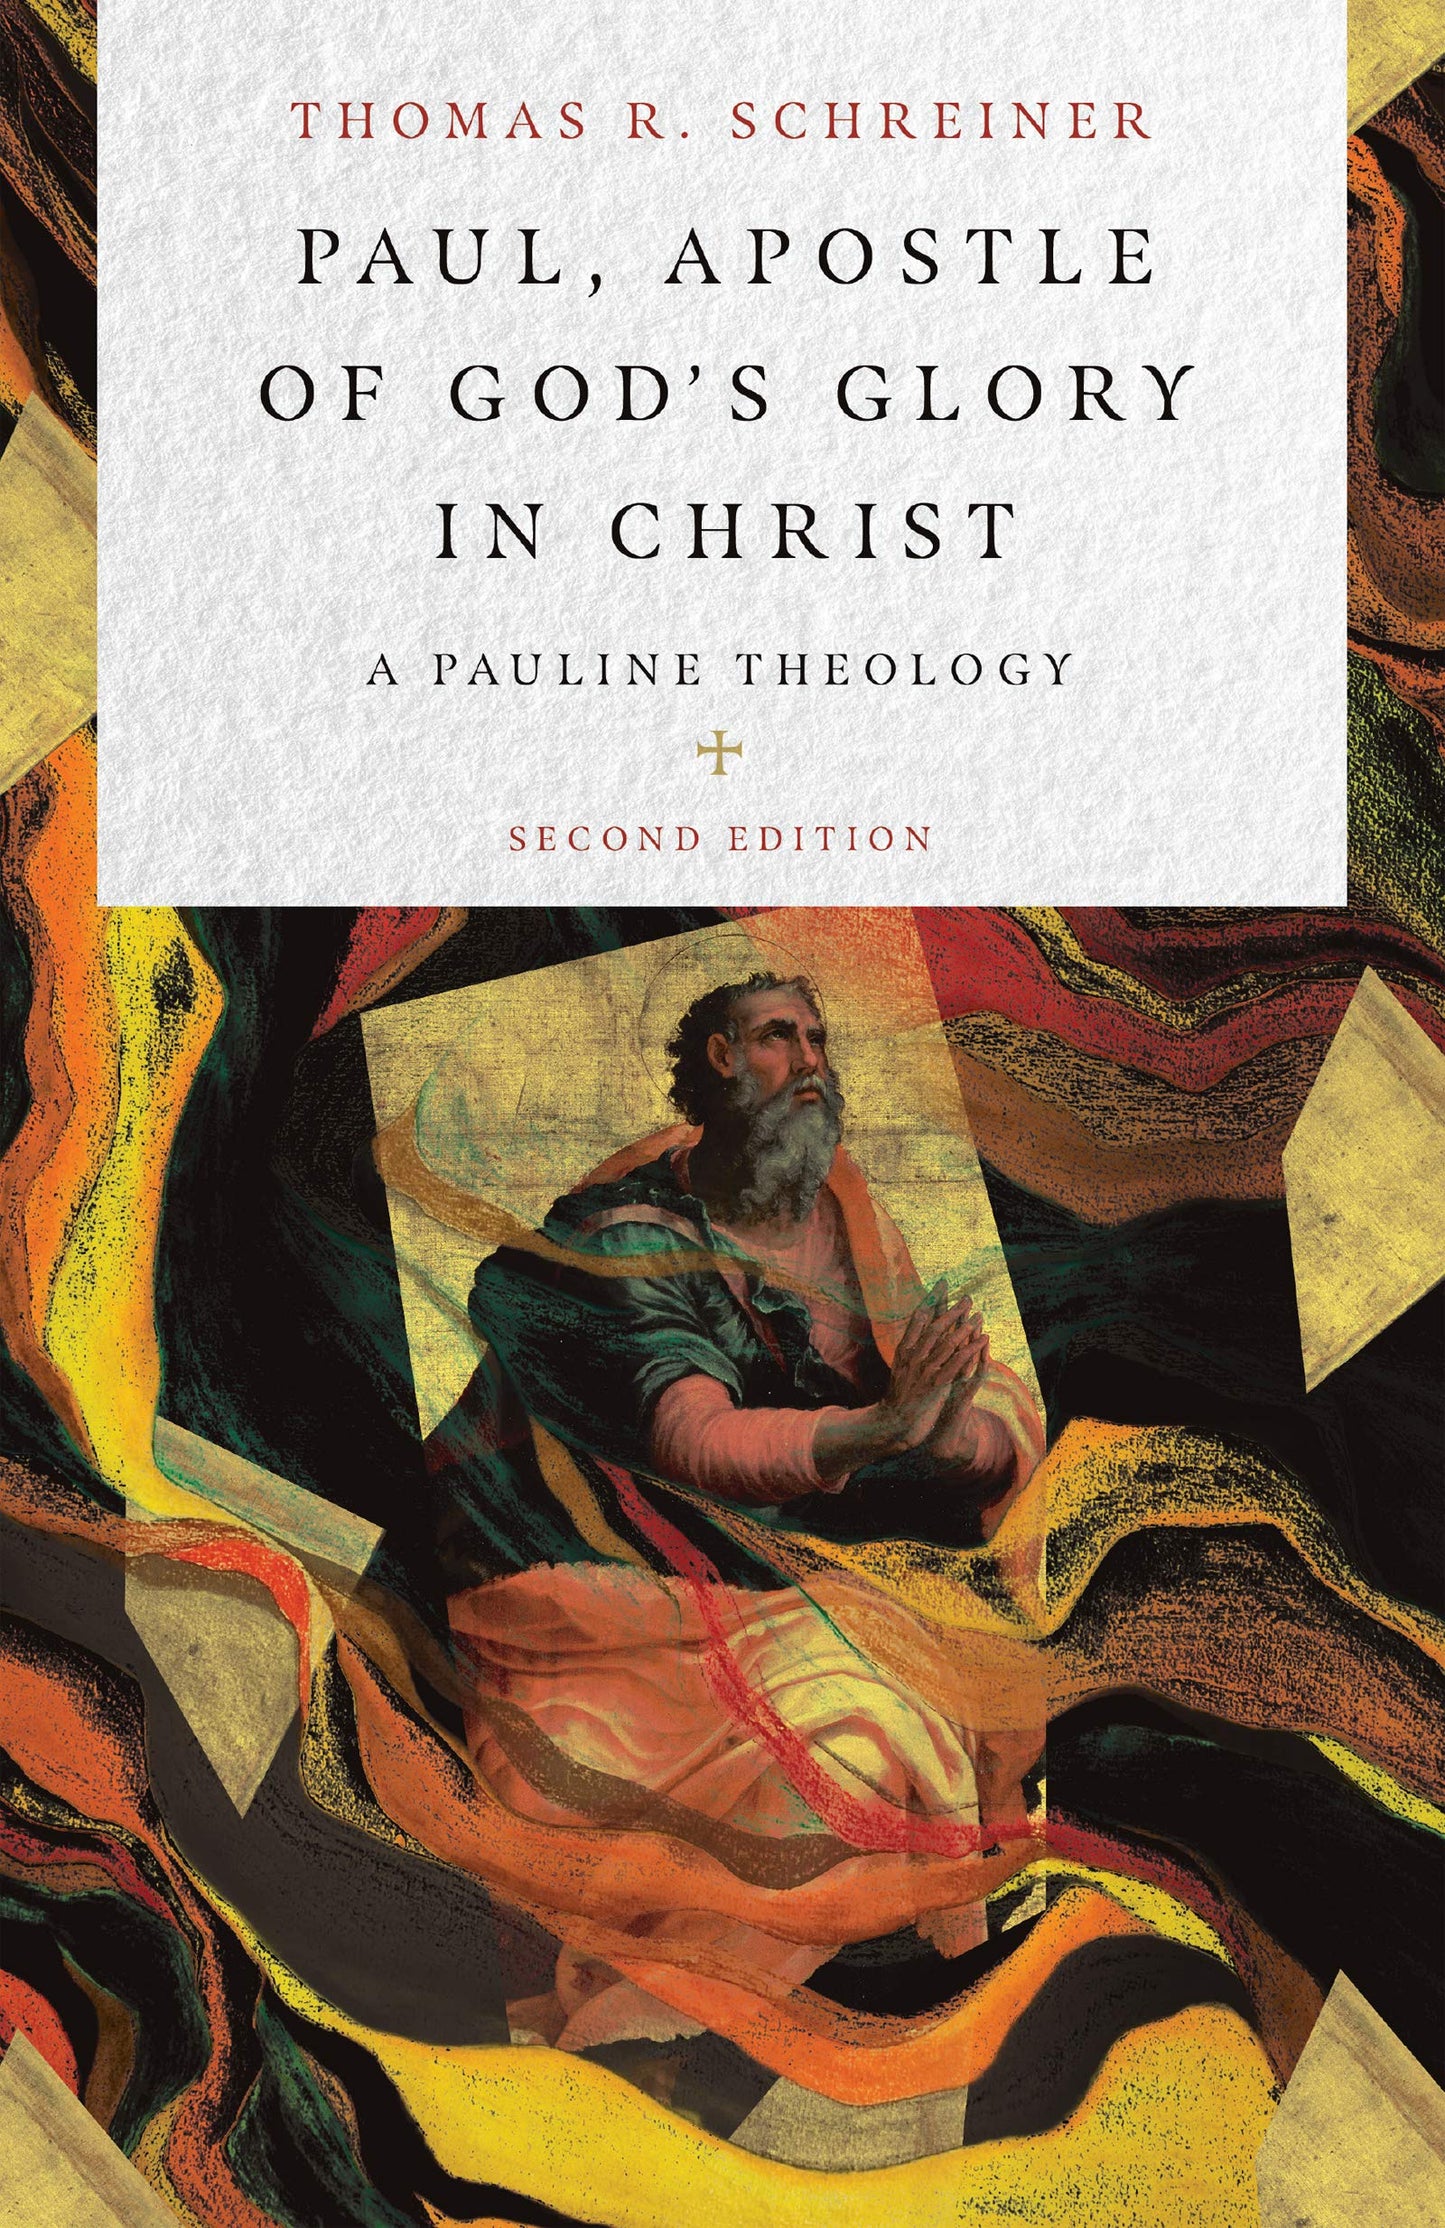 Paul Apostle of God's Glory in Christ (2nd edition, 2020)